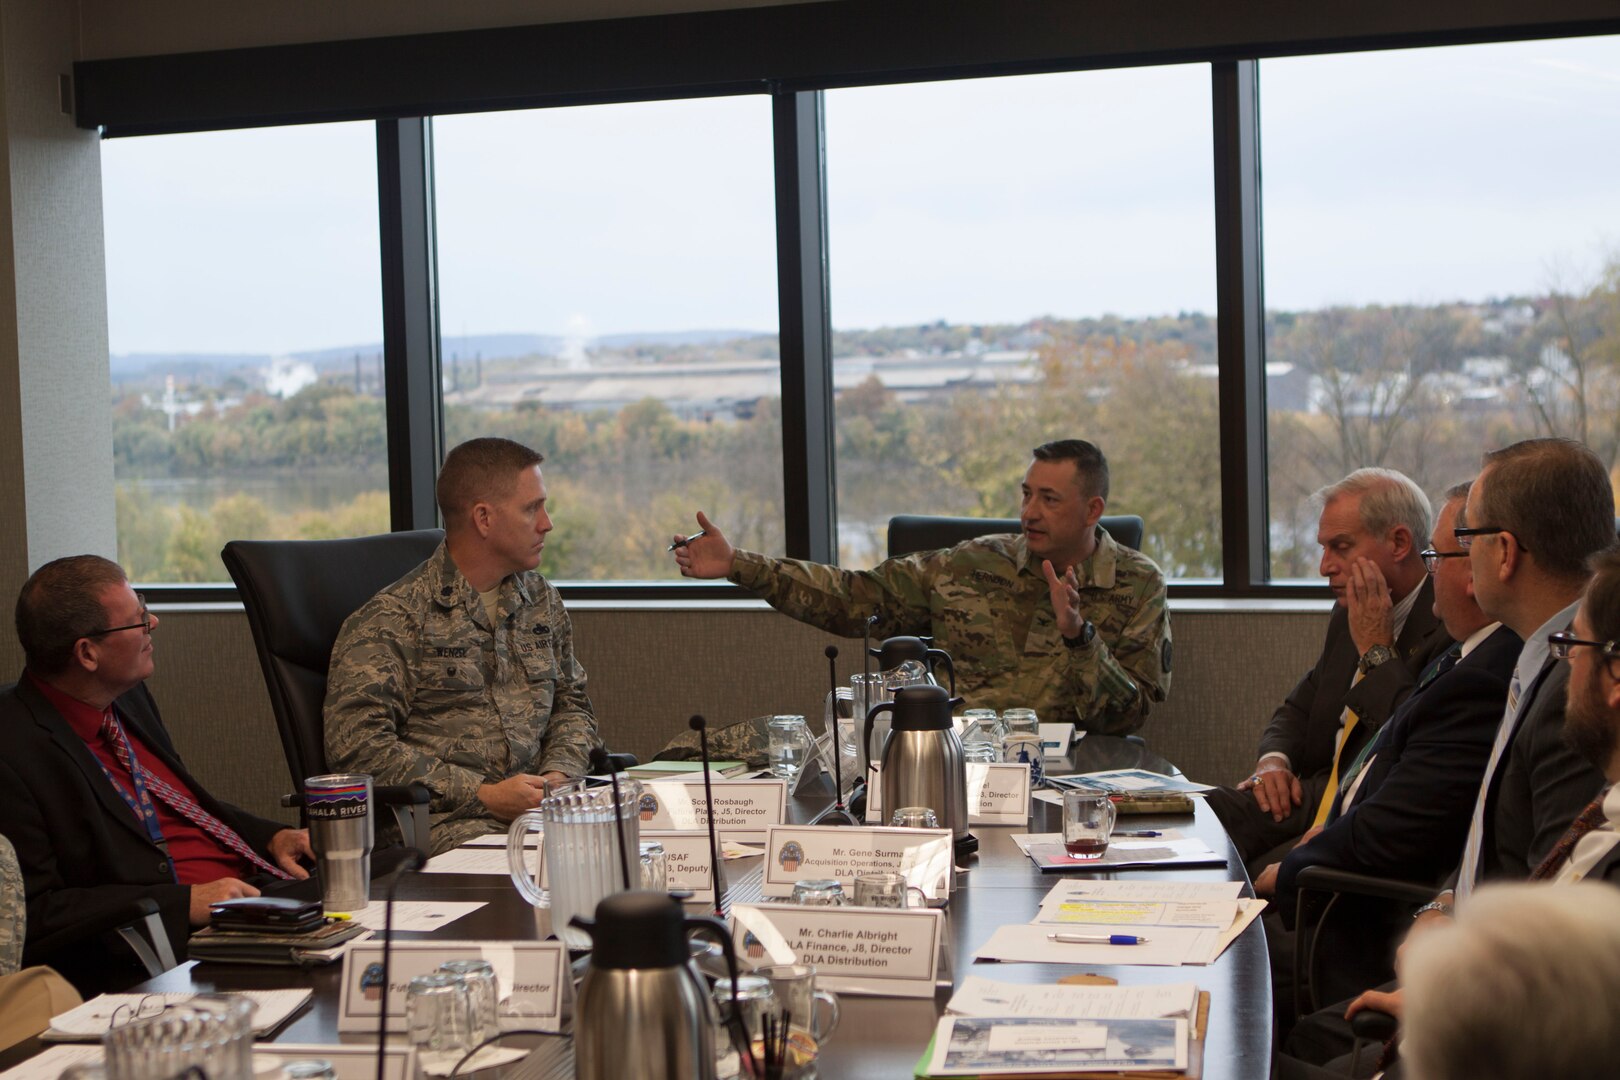 Army Col. Archie S. Herndon Jr., commander of DLA Central Command and Special Operations Command, meets with senior leadership at DLA Distribution headquarters during a visit on Nov. 7.